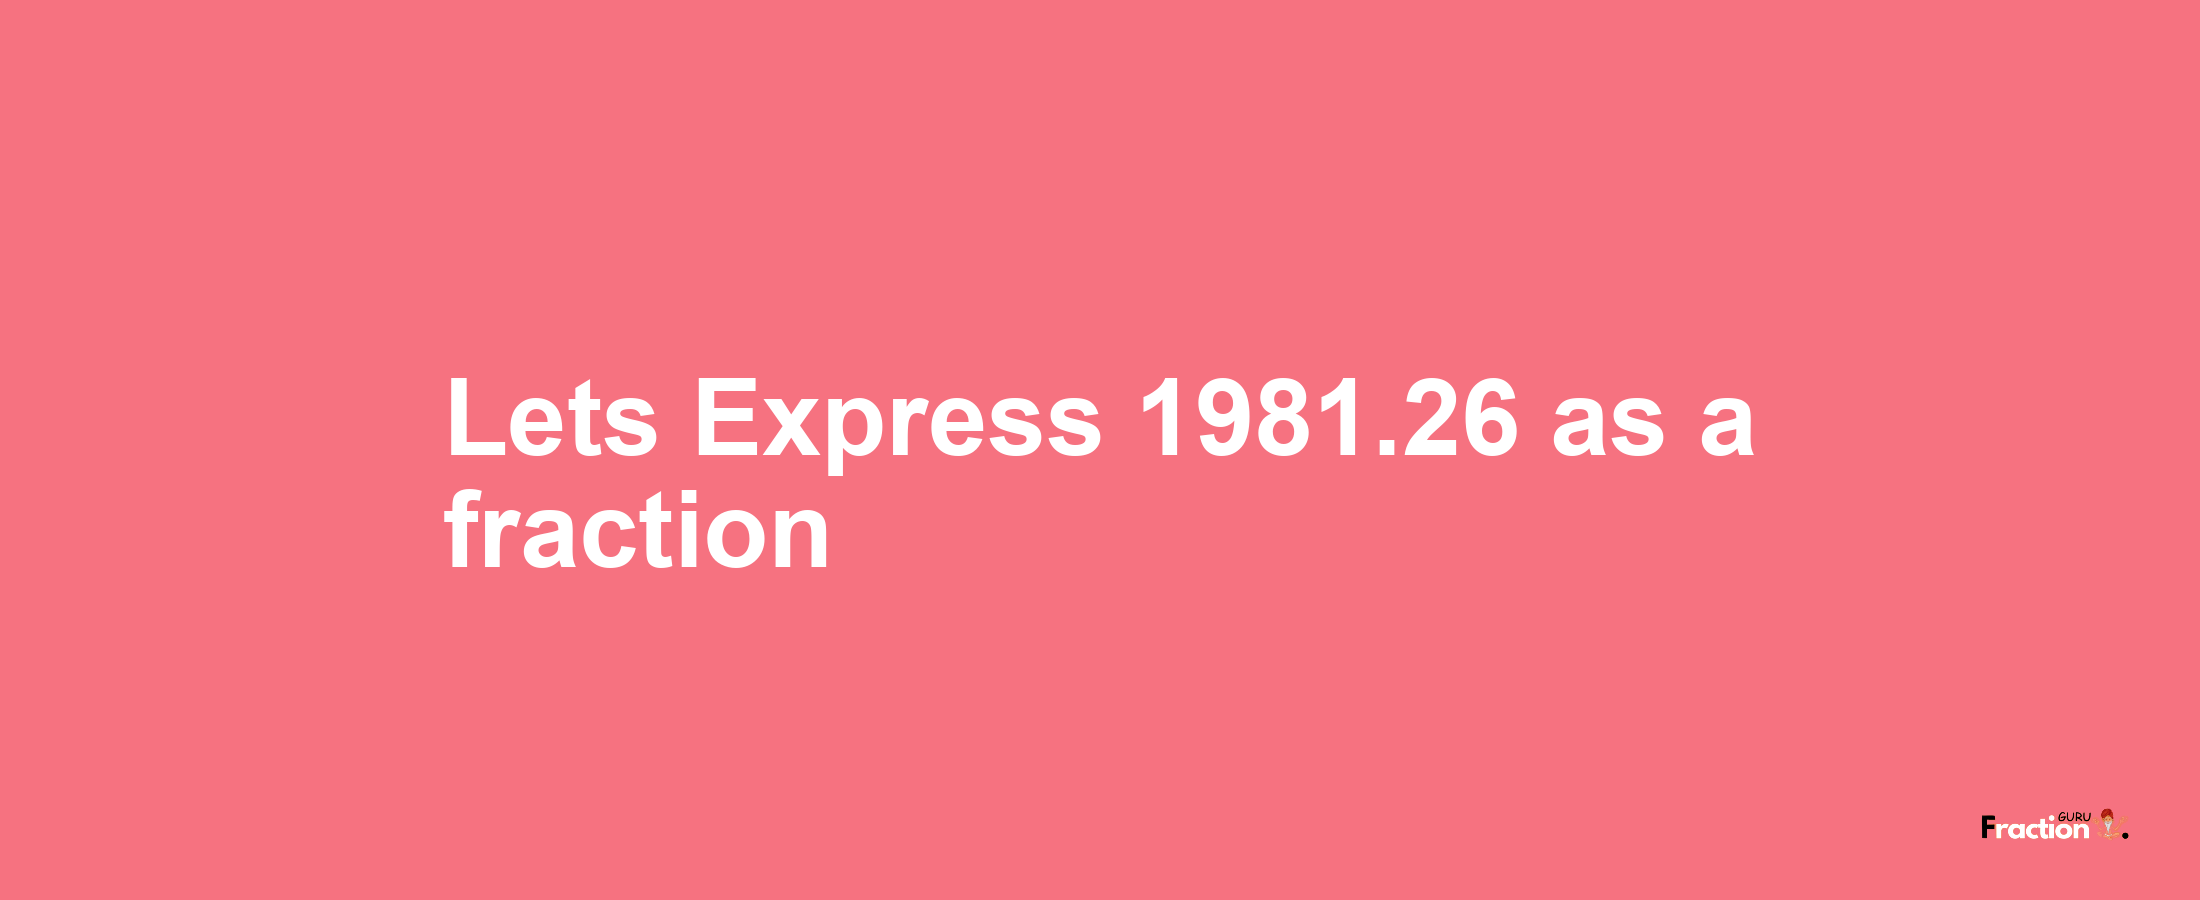 Lets Express 1981.26 as afraction